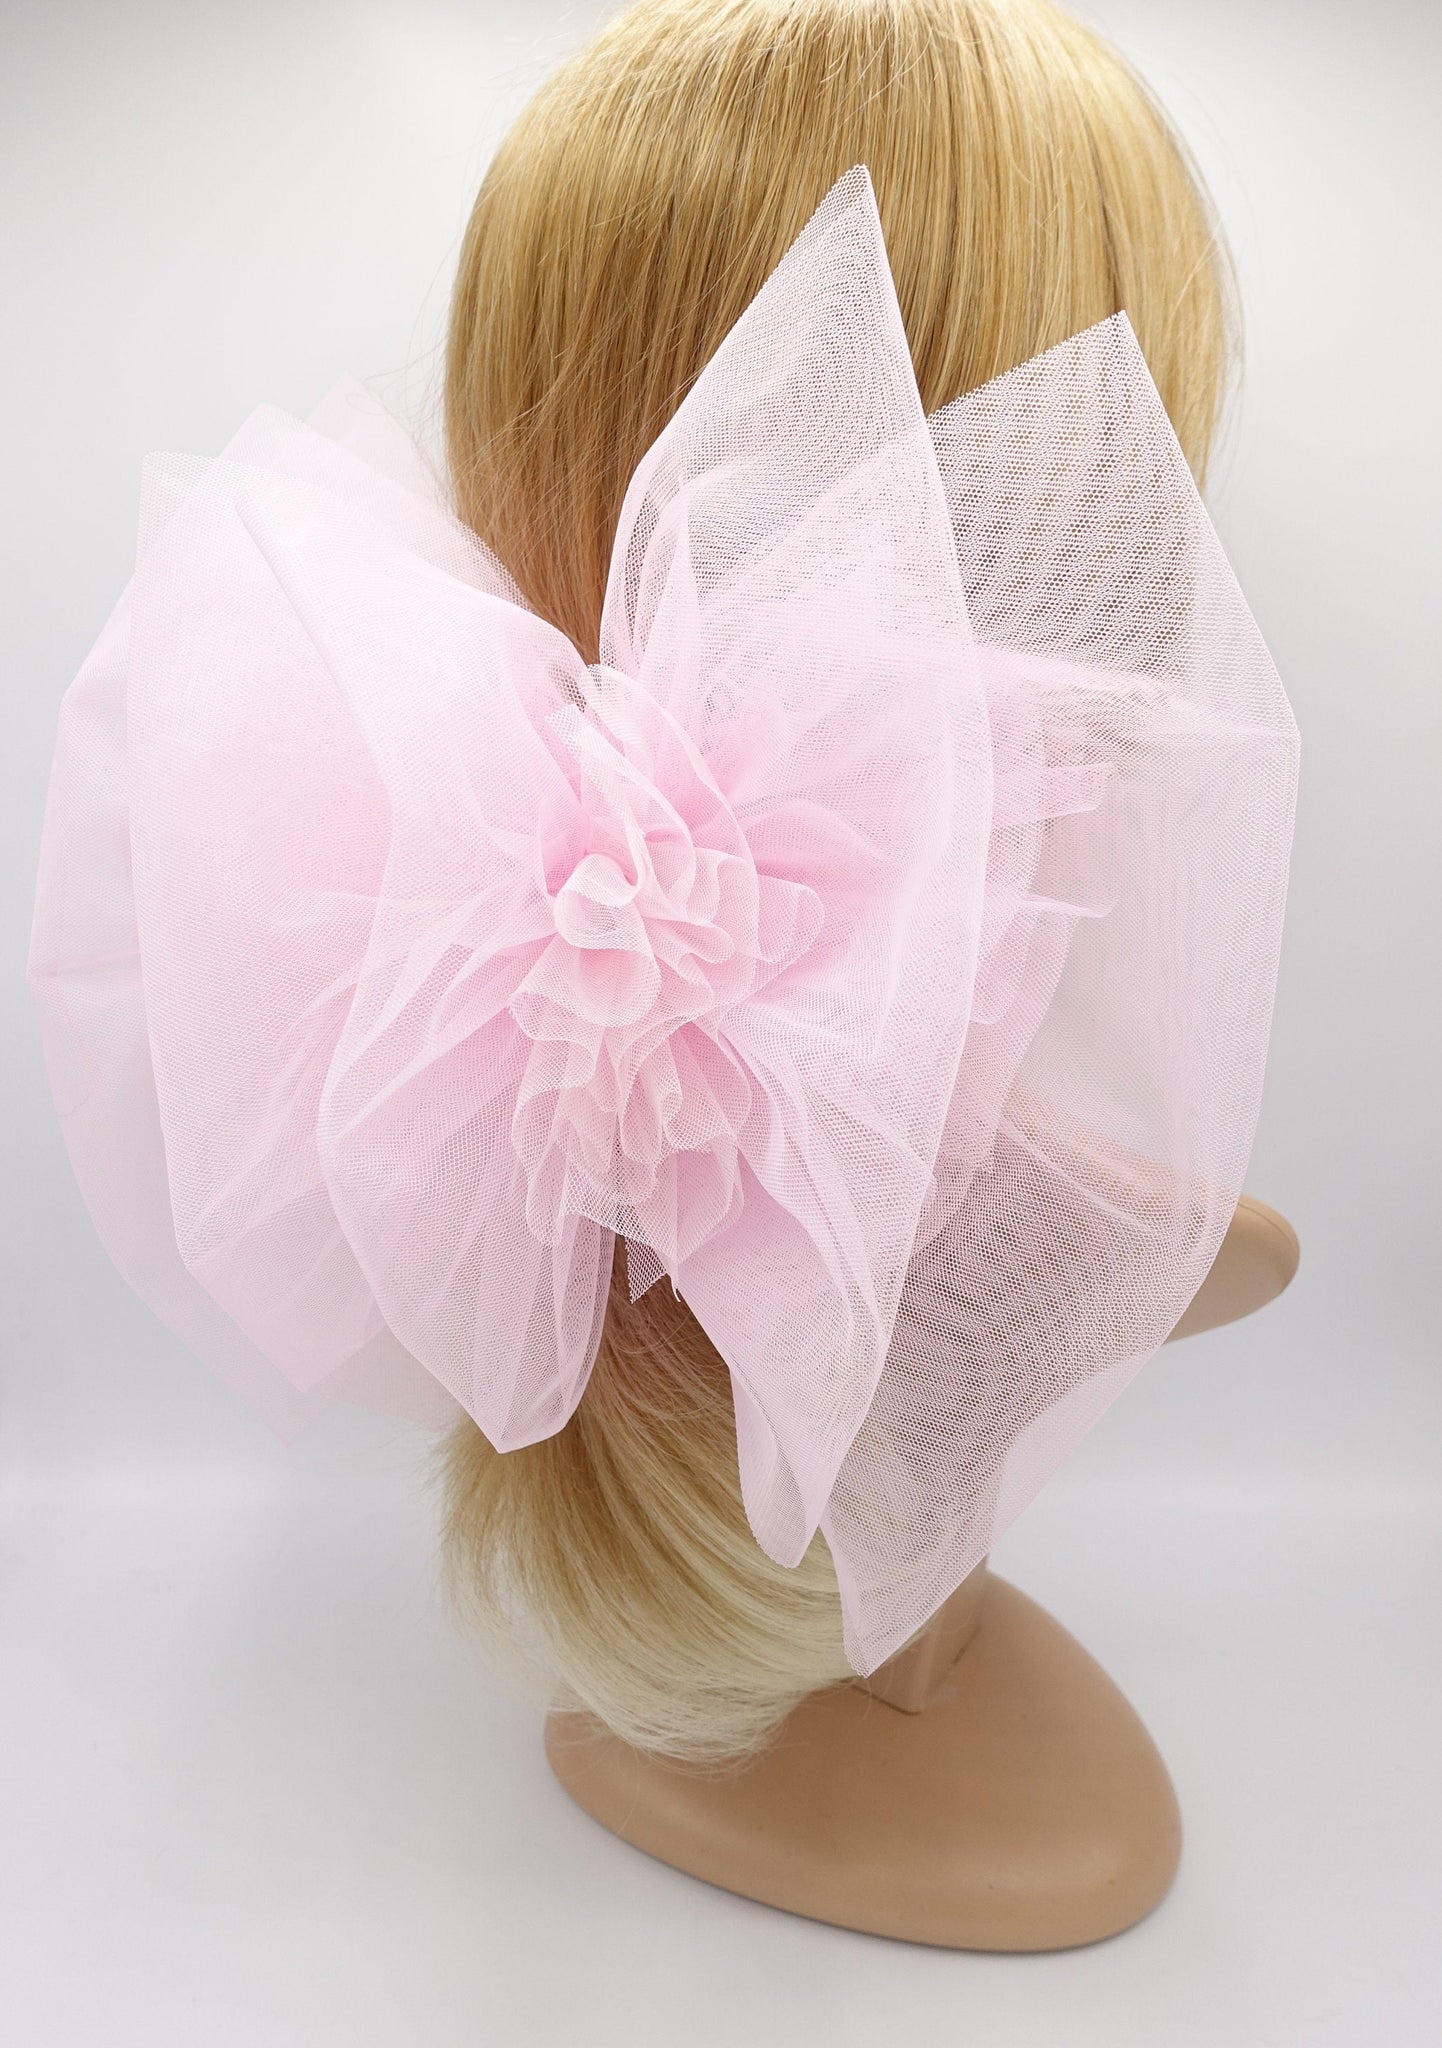 VeryShine Hair Accessories Pink gigantic tulle hair bow brooch hair accessory for women